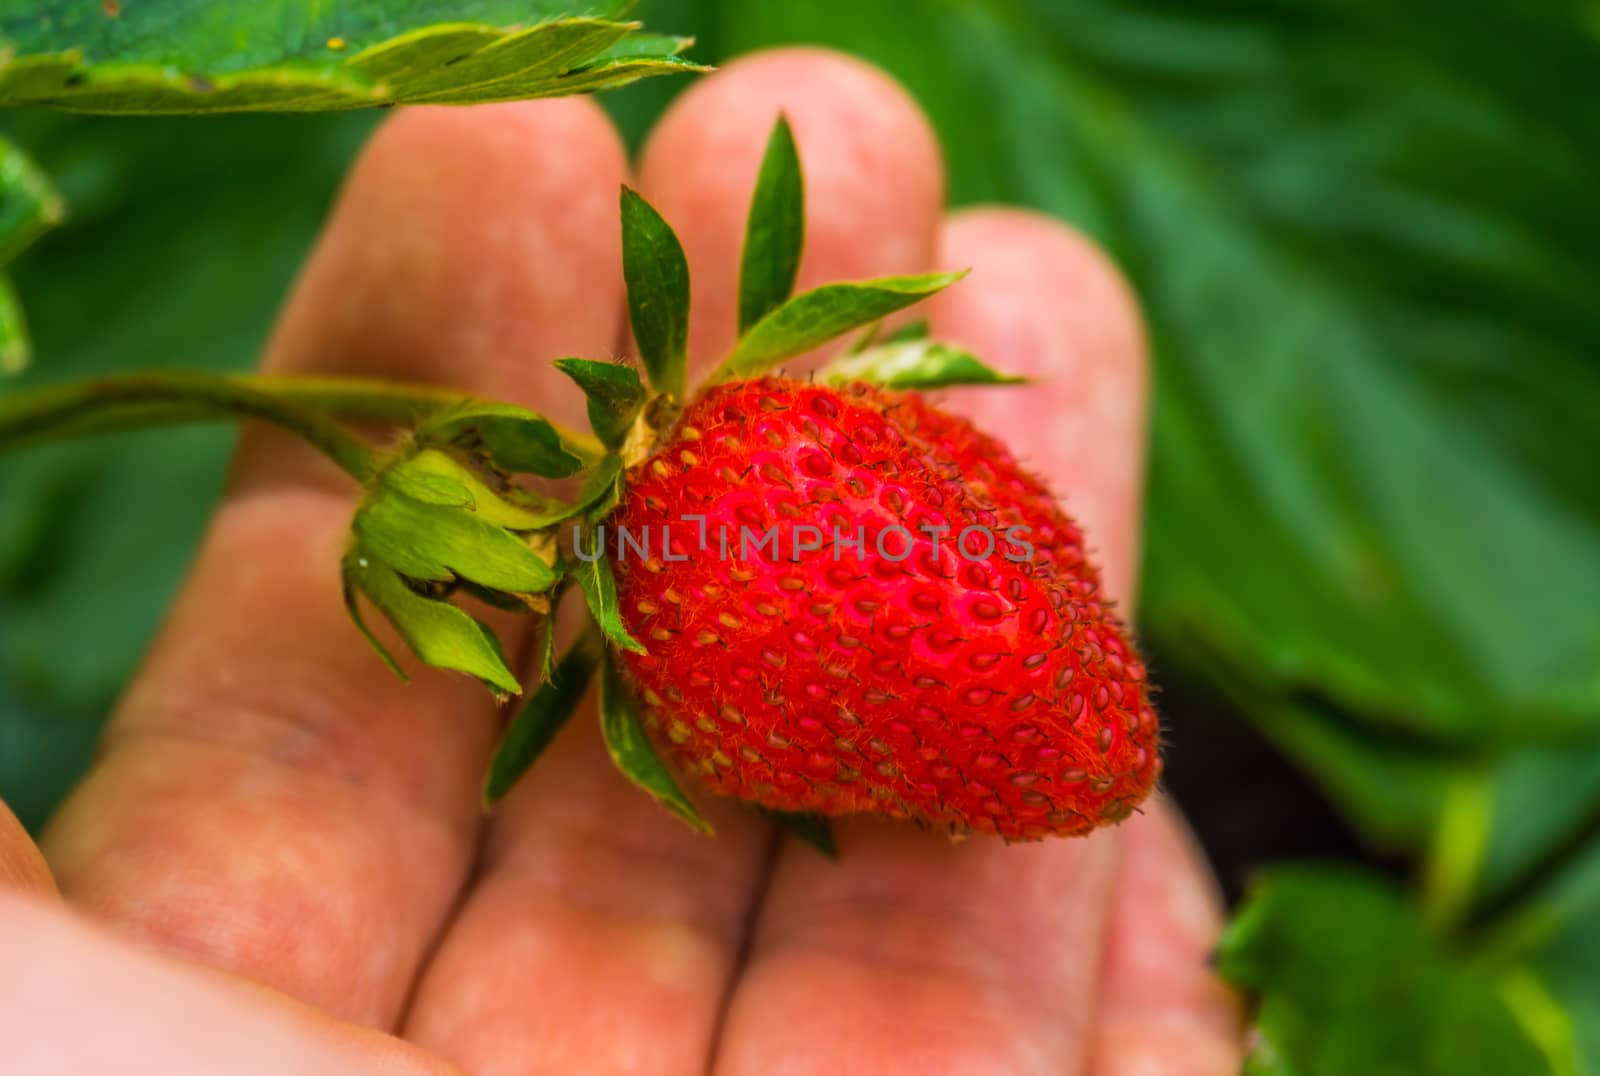 Hand holding a fresh ripe organically grown strawberry, Agriculture and gardening background